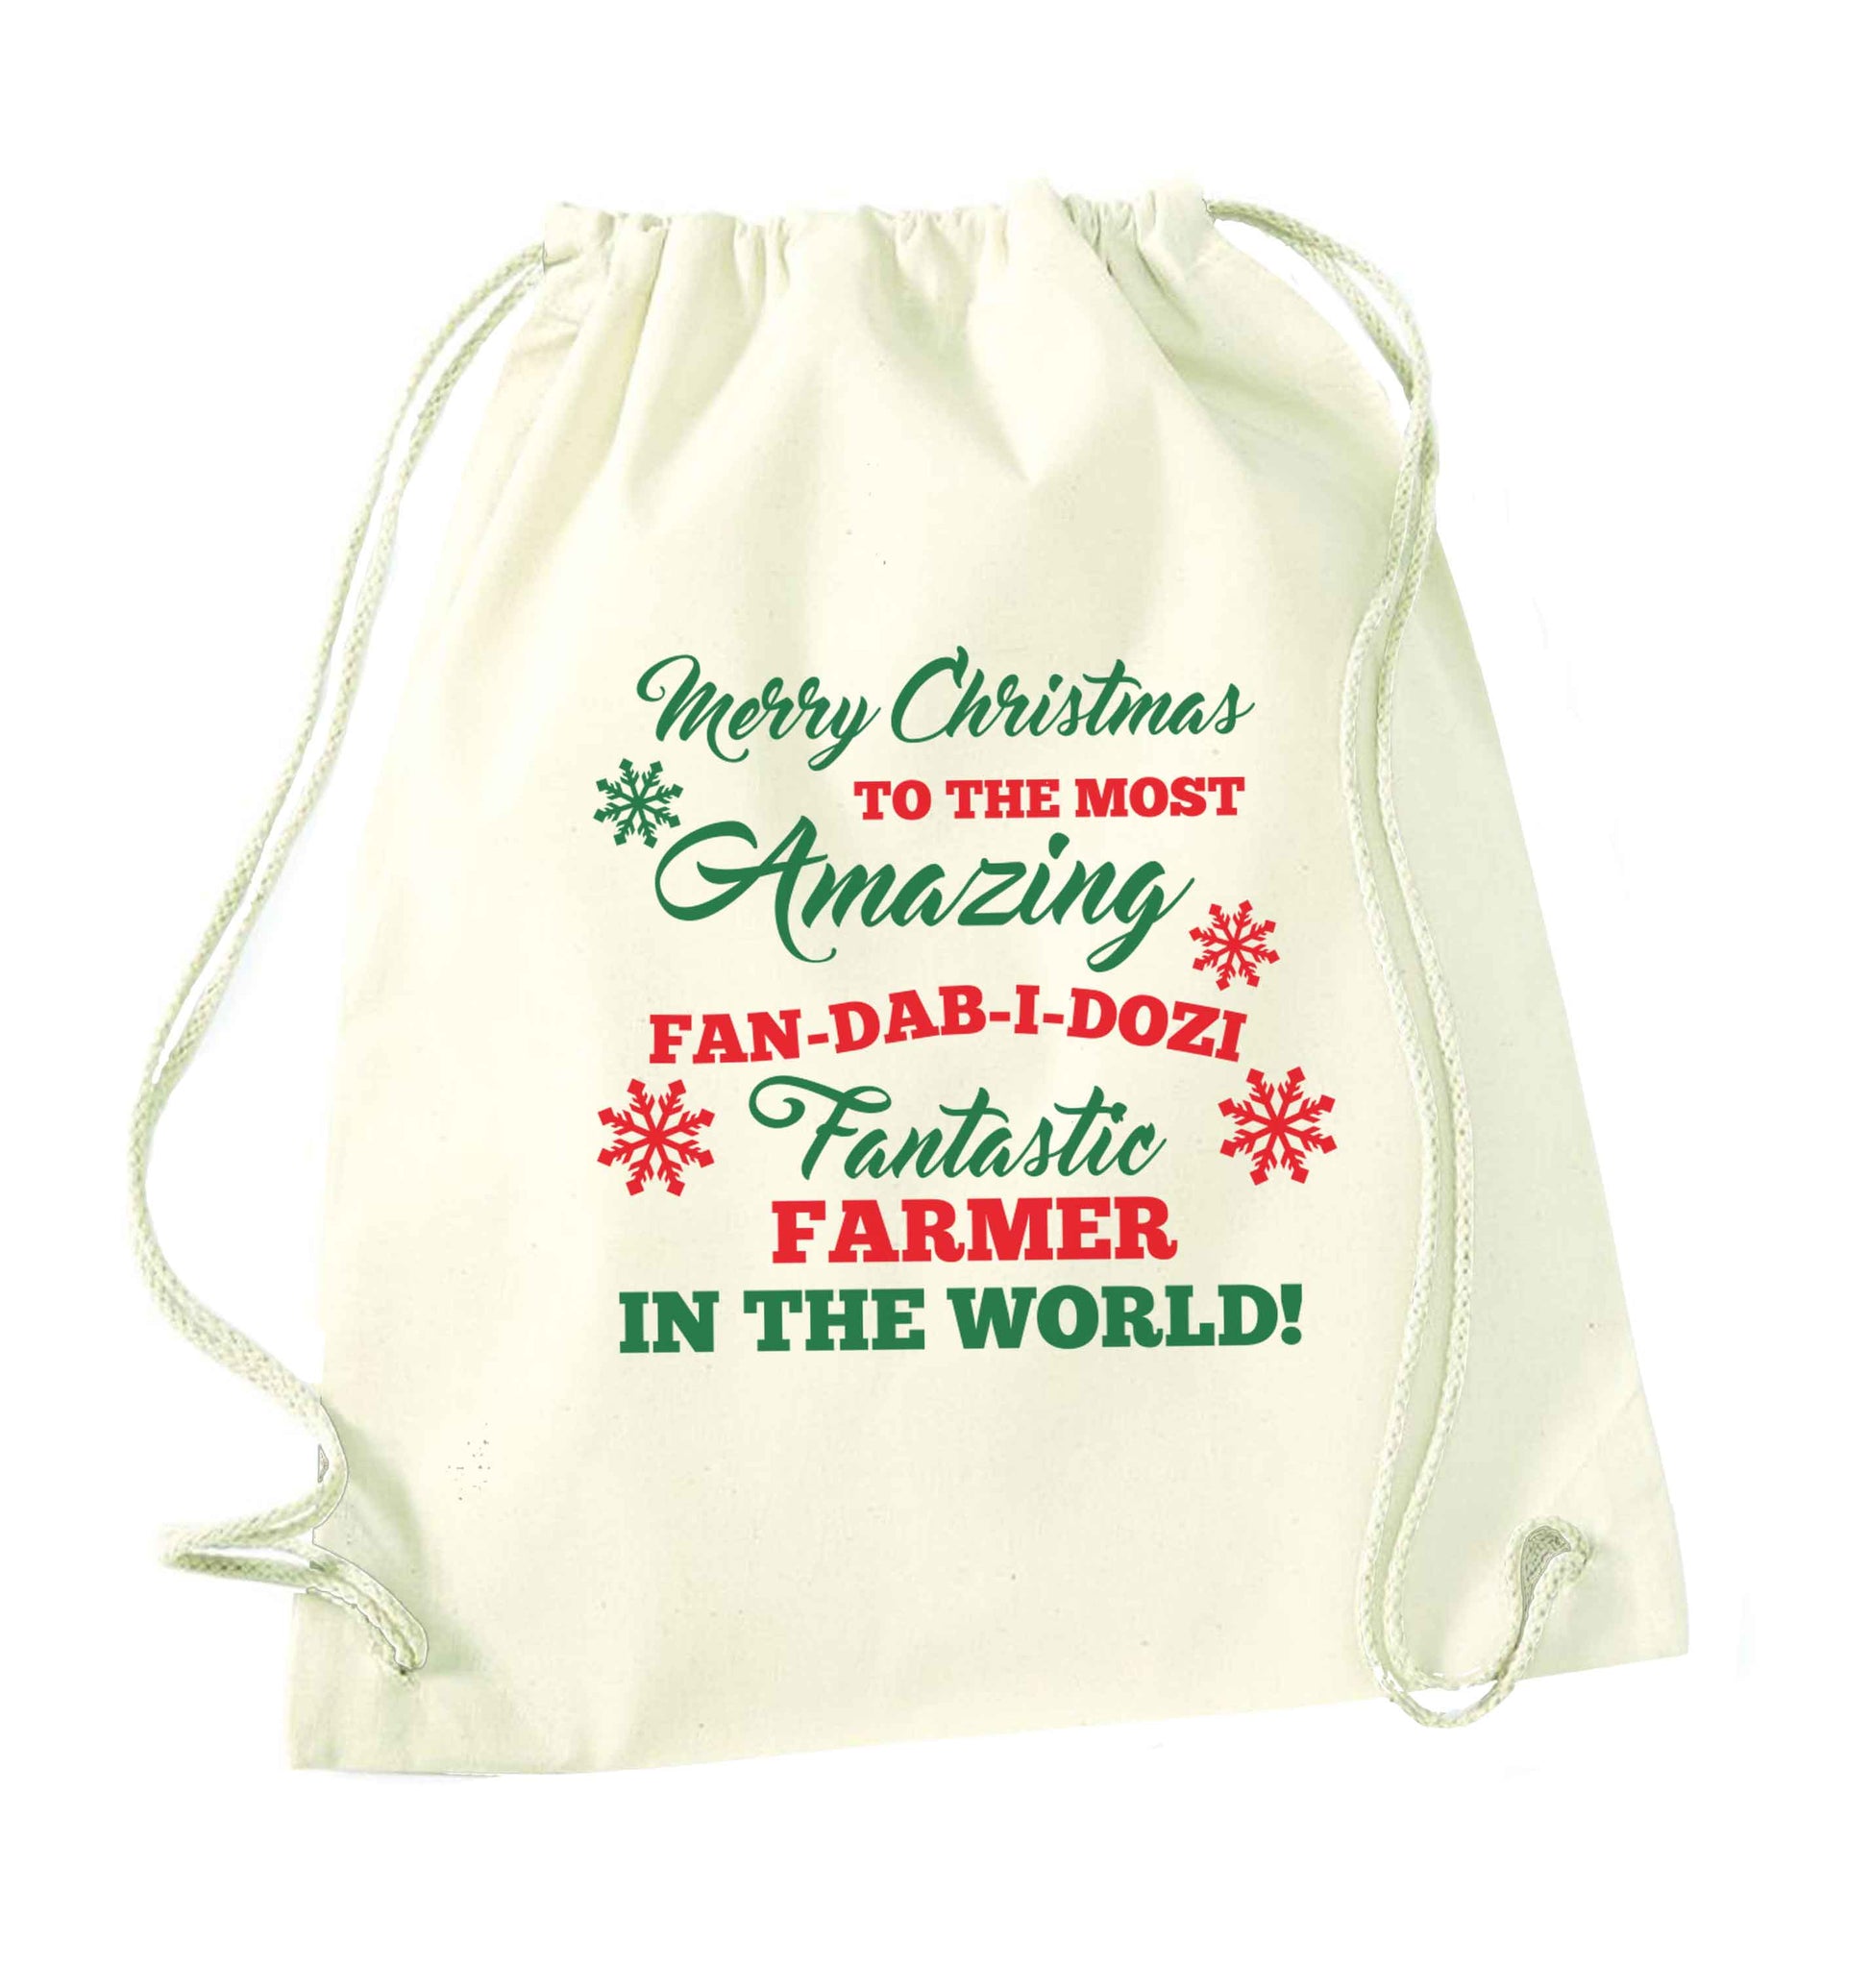 Merry Christmas to the most amazing farmer in the world! natural drawstring bag